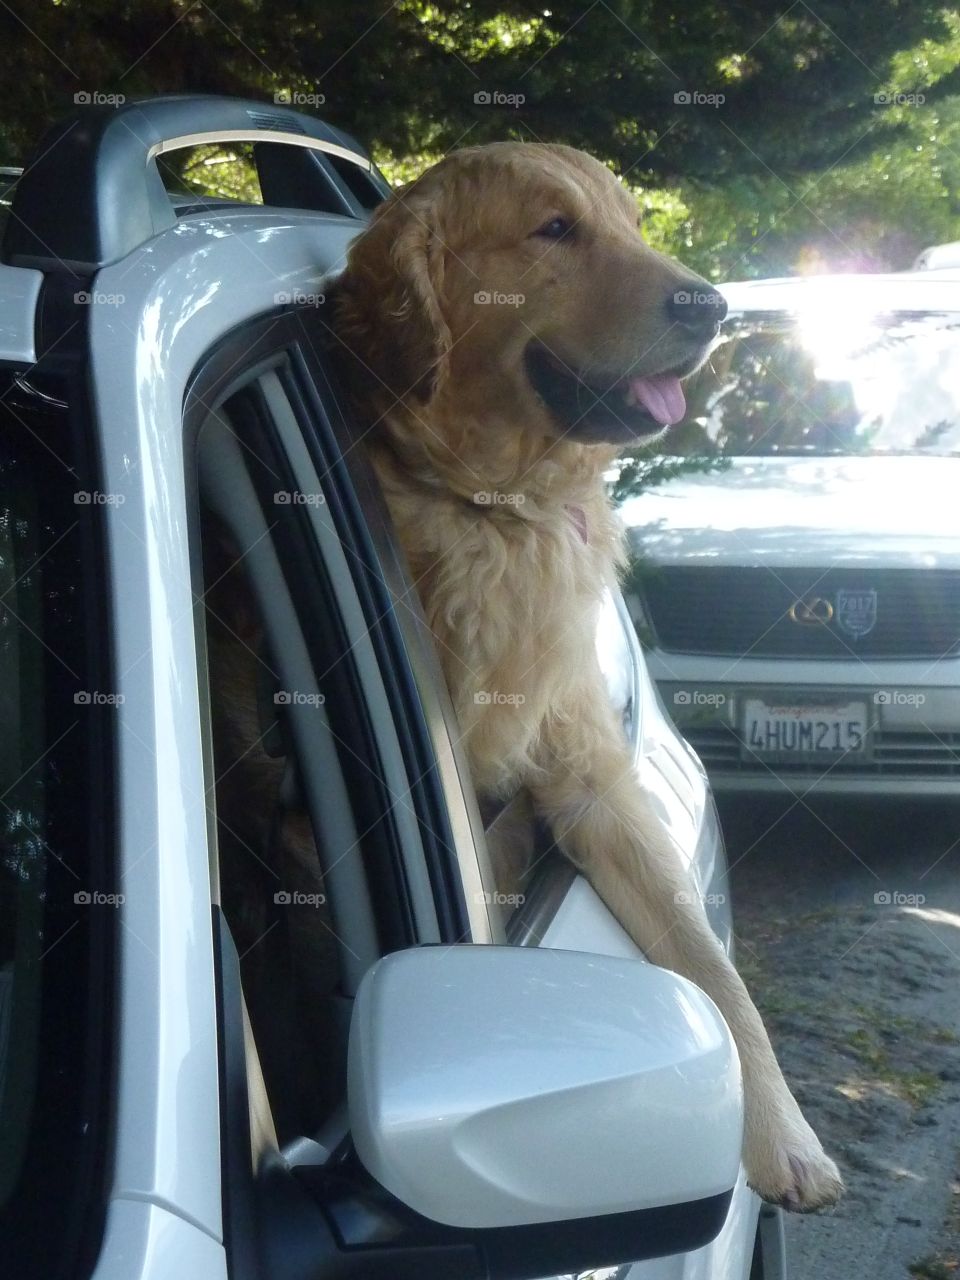 It’s definitely this dog’s day as he juts his classic Golden Retriever head out the car window, delighting in the cool air and in all that he can see and smell along the way. 